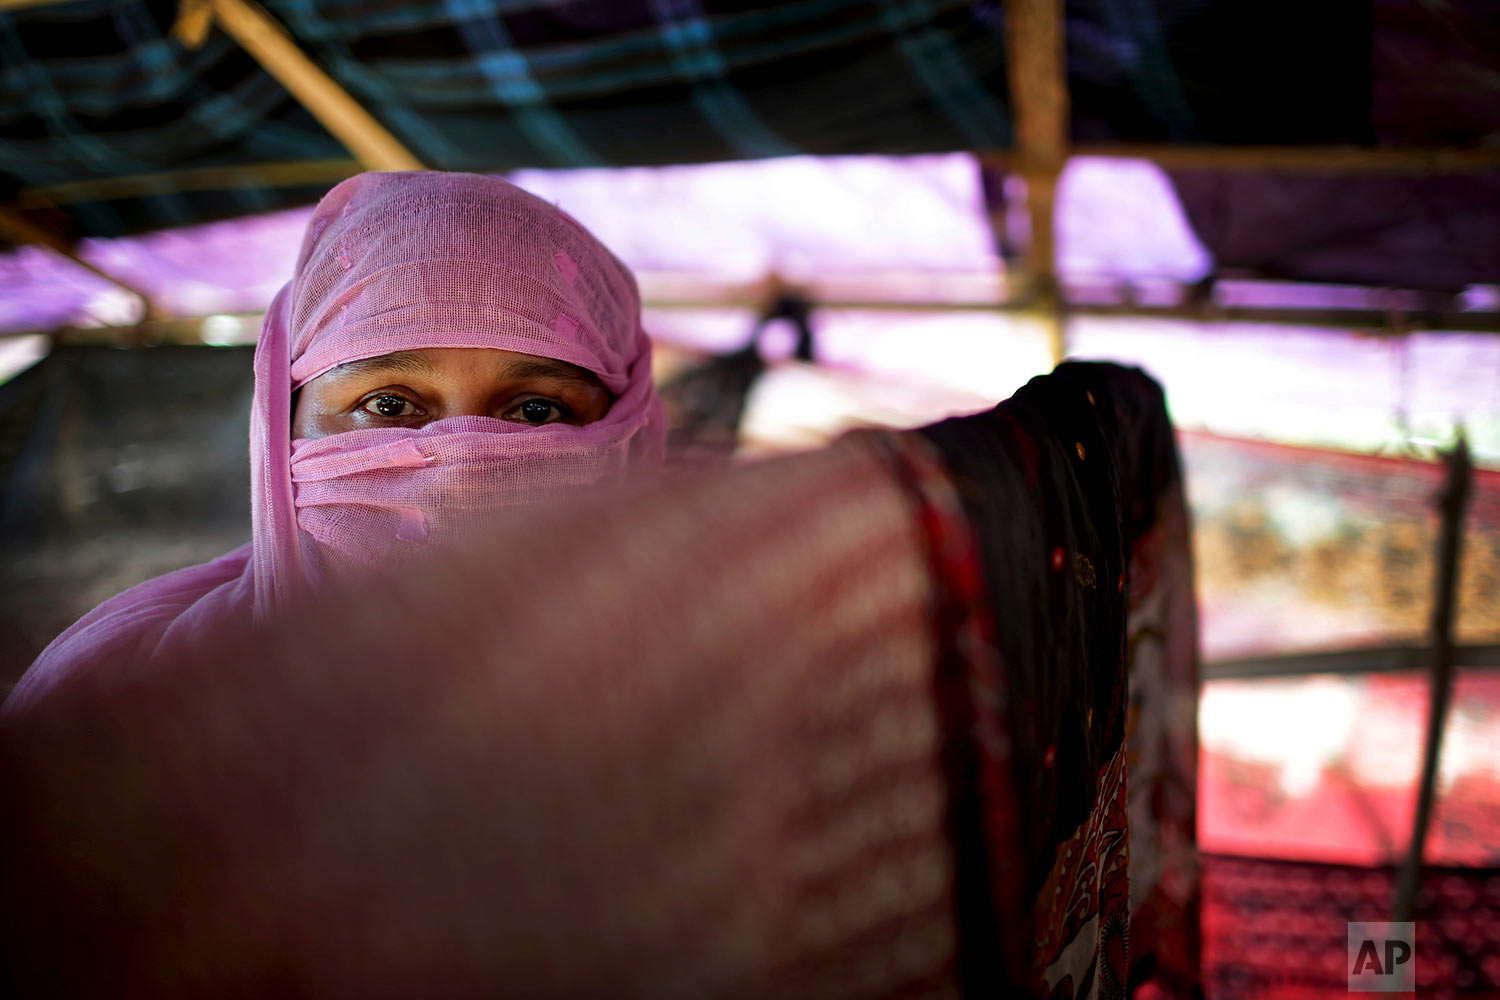  In this Monday, Nov. 20, 2017, photo, M, 30, mother of four, who says she was raped by members of Myanmar's armed forces in late August, is photographed in her tent in Kutupalong refugee camp in Bangladesh.  (AP Photo/Wong Maye-E)




 